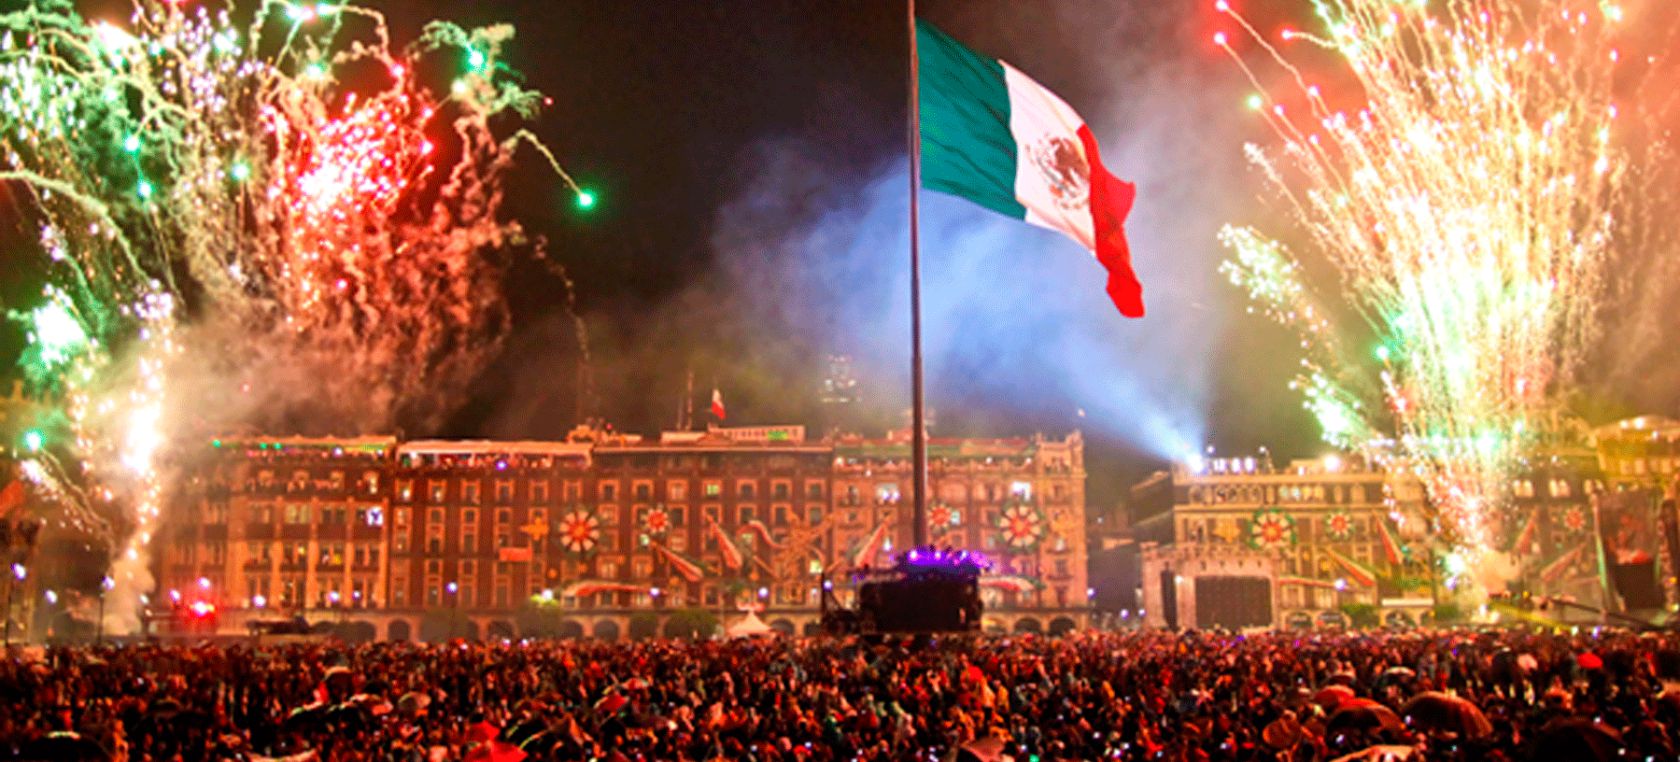 El Grito the story behind the famous Mexican Clamor of